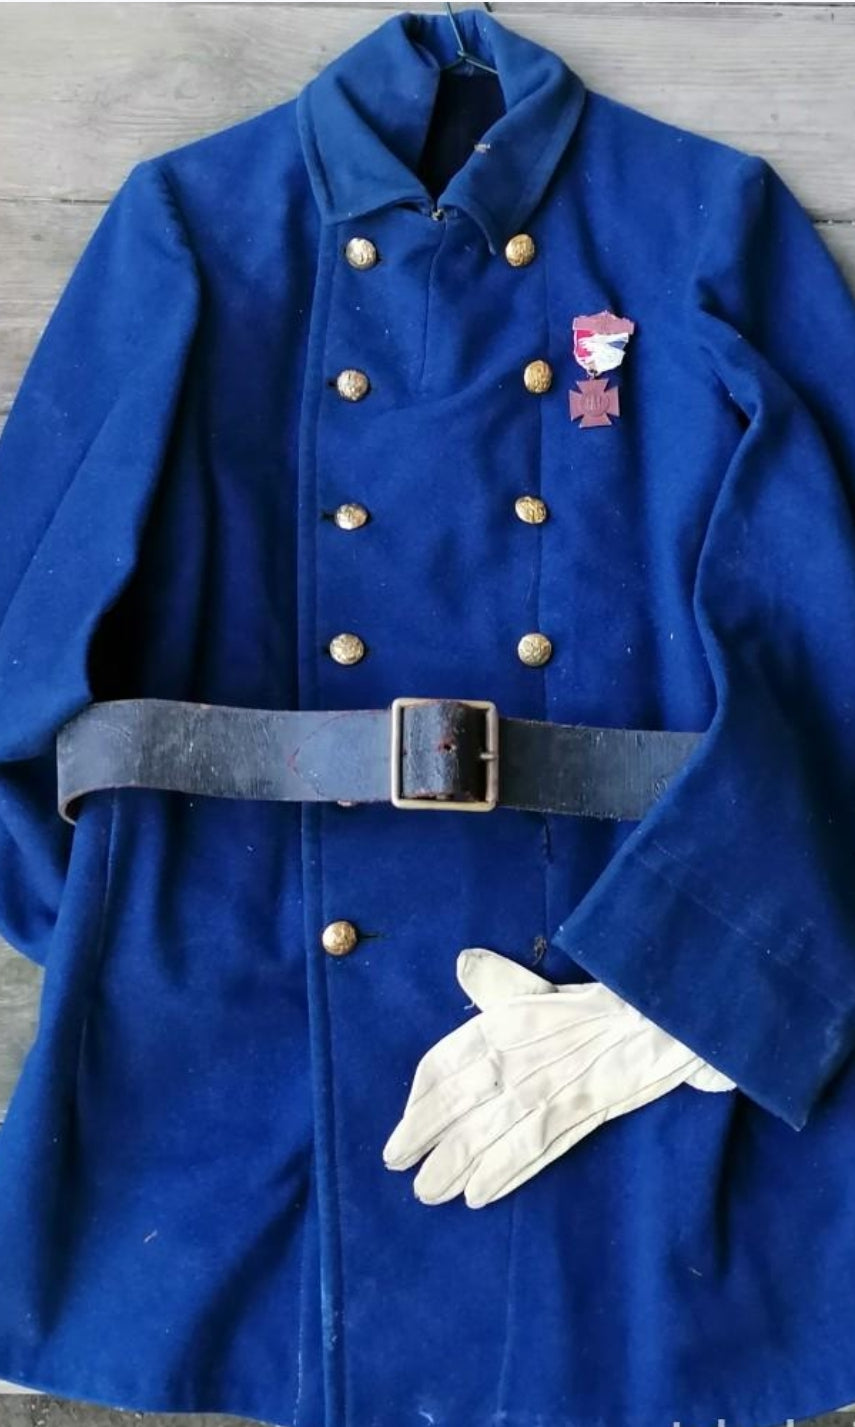 North American uniform from the end of the 19th century